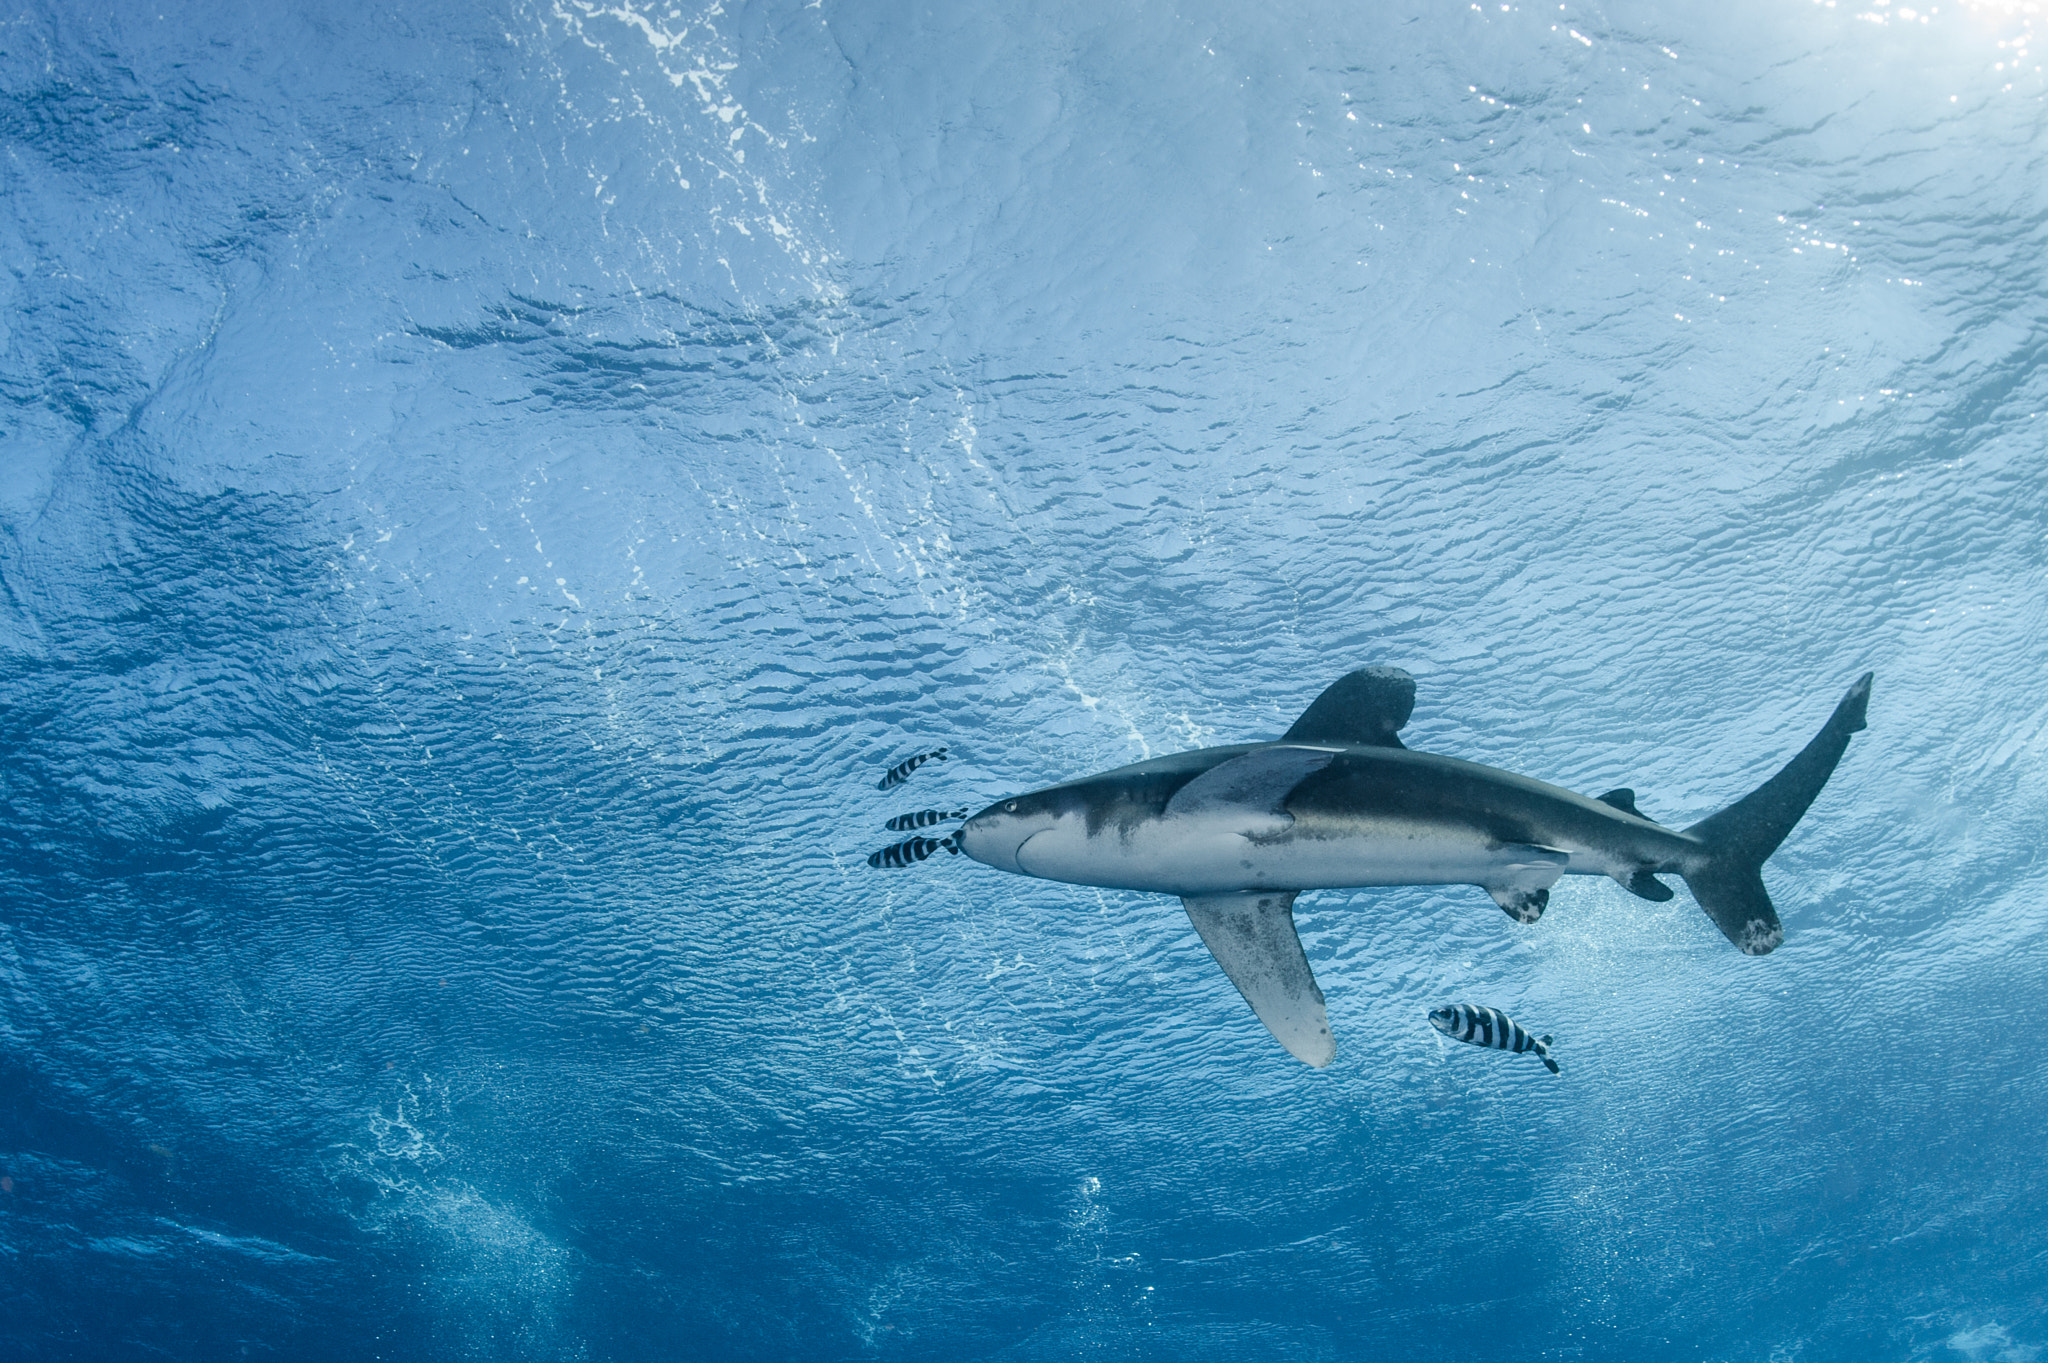 Nikon D700 sample photo. Oceanic white tip and great sea texture photography